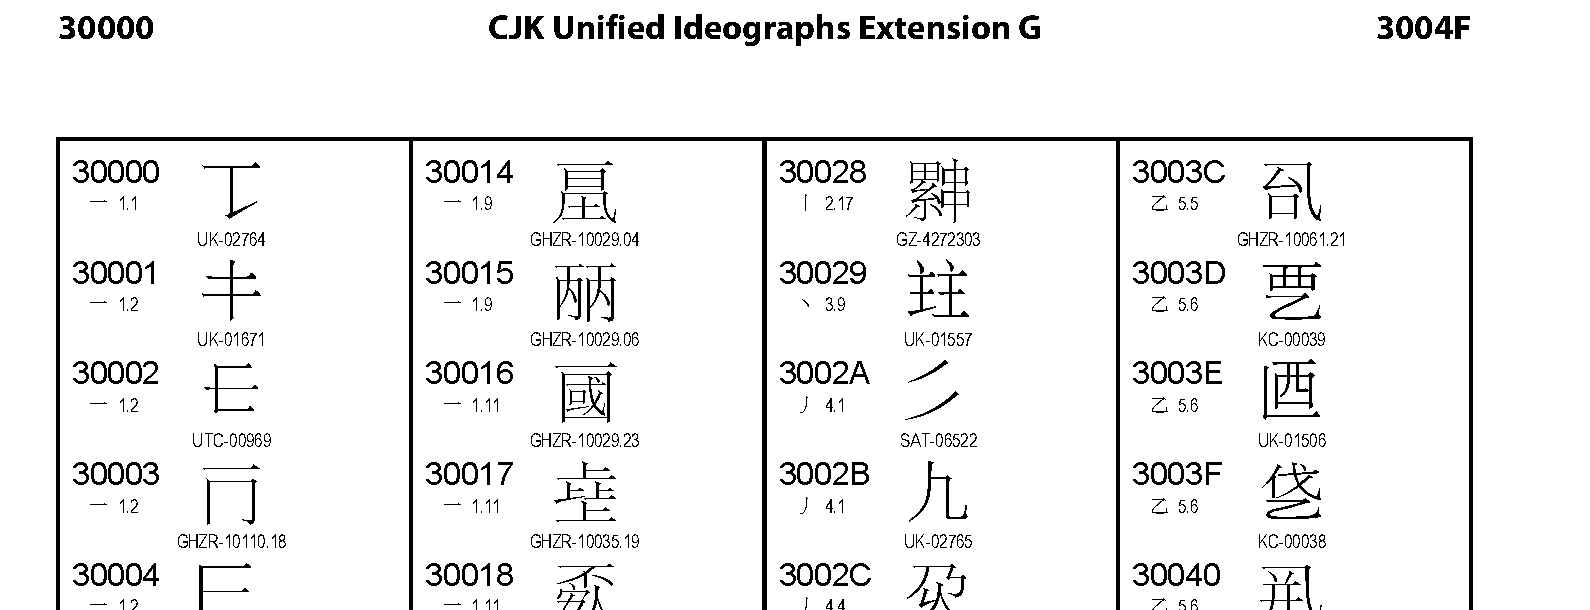 Unicode - CJK Unified Ideographs Extension G